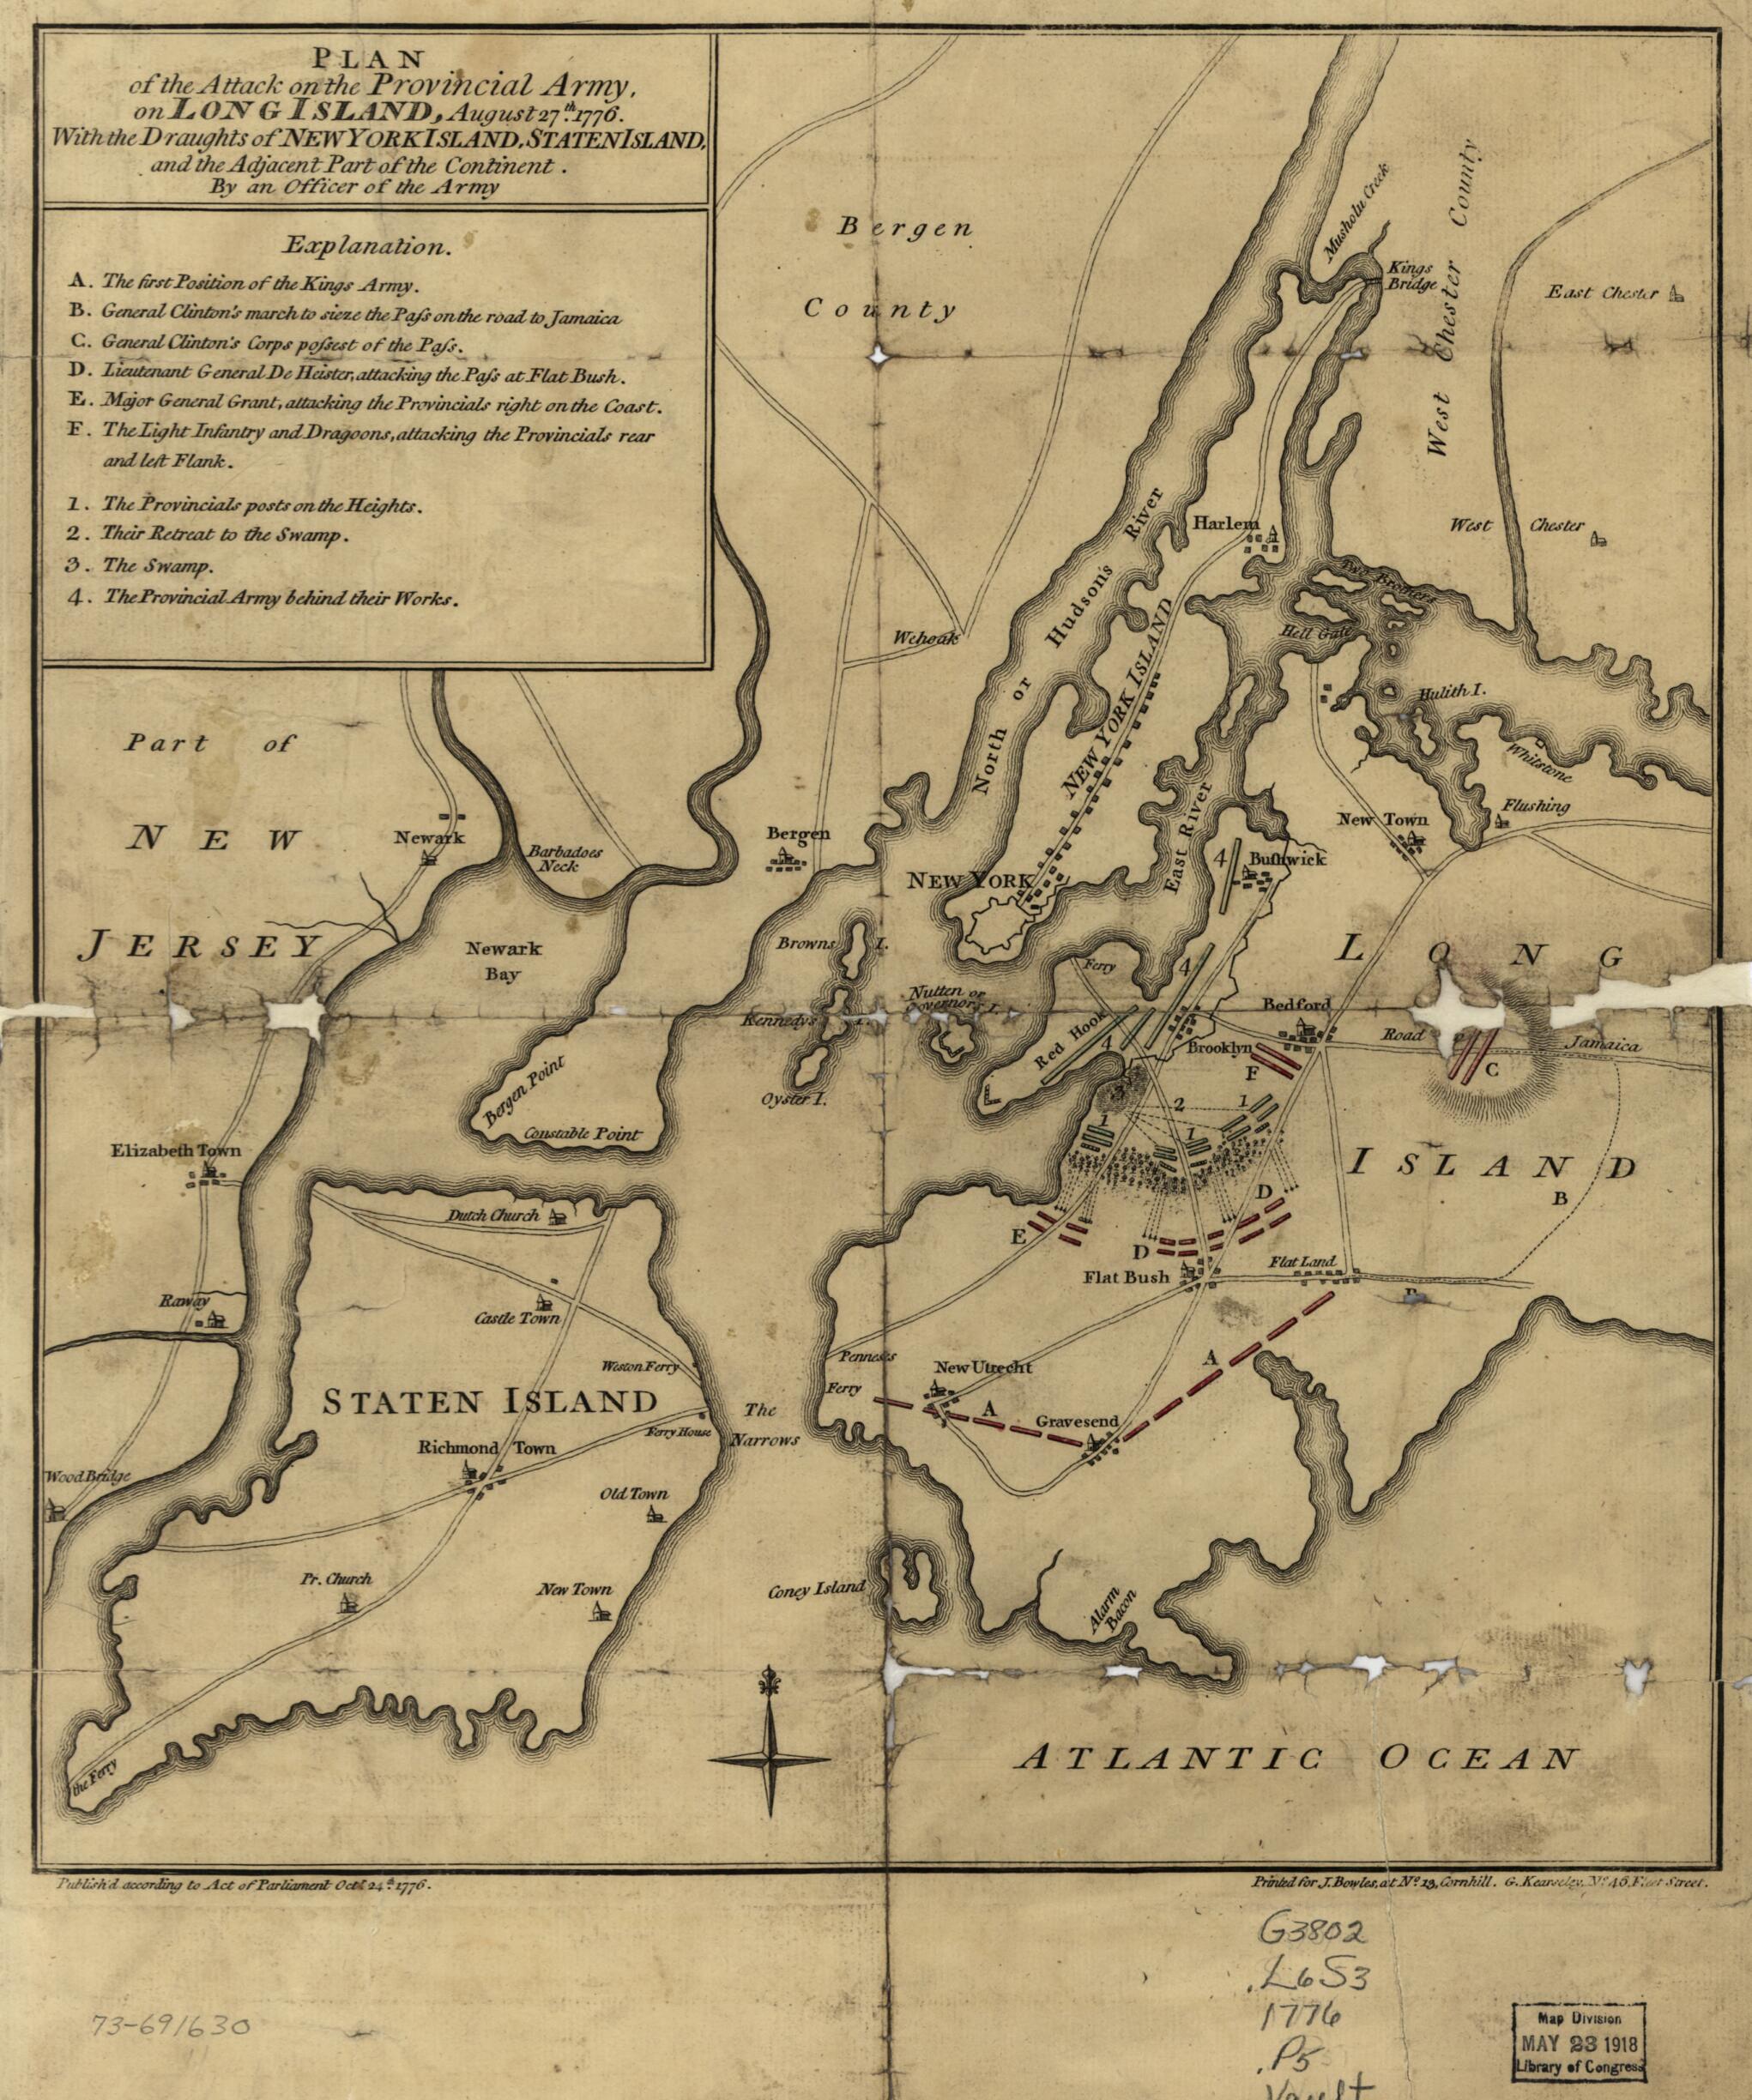 This old map of Plan of the Attack On the Provincial Army On Long Island, August 27th from 1776. With the Draughts of New York Island, Staten Island, and the Adjacent Part of the Continent was created by John Bowles in 1776